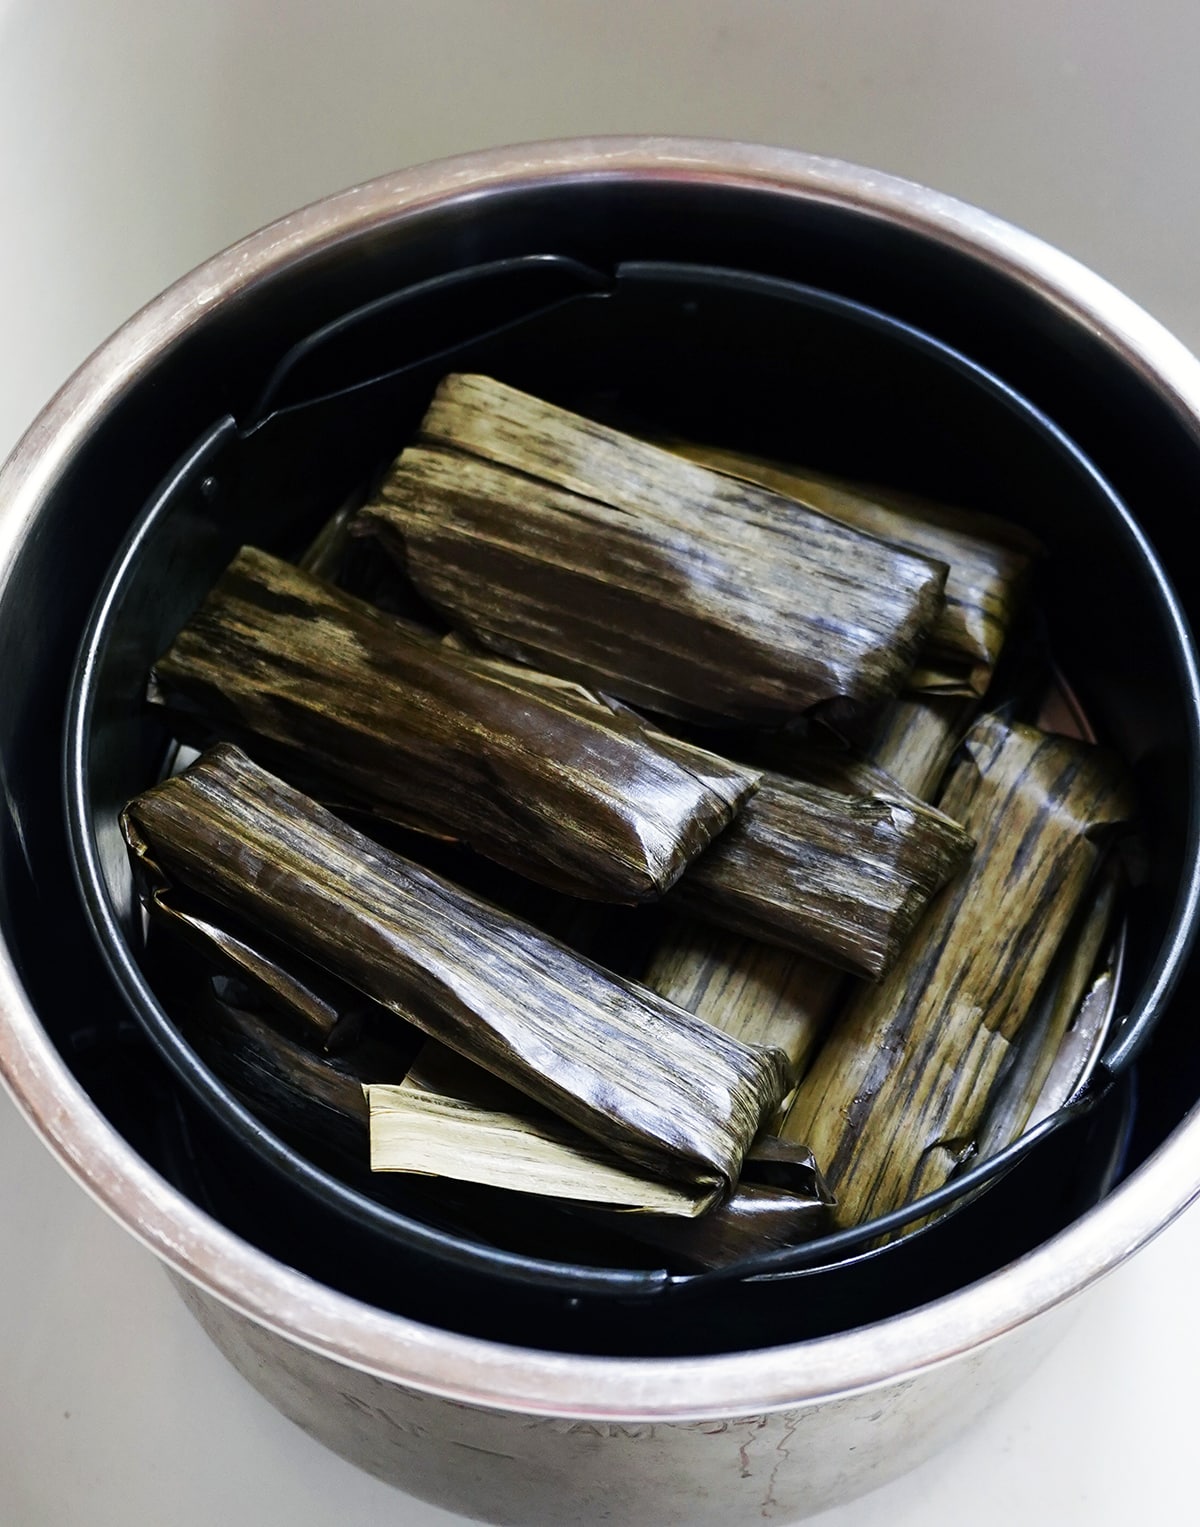 Suman Cooked in the Instant Pot